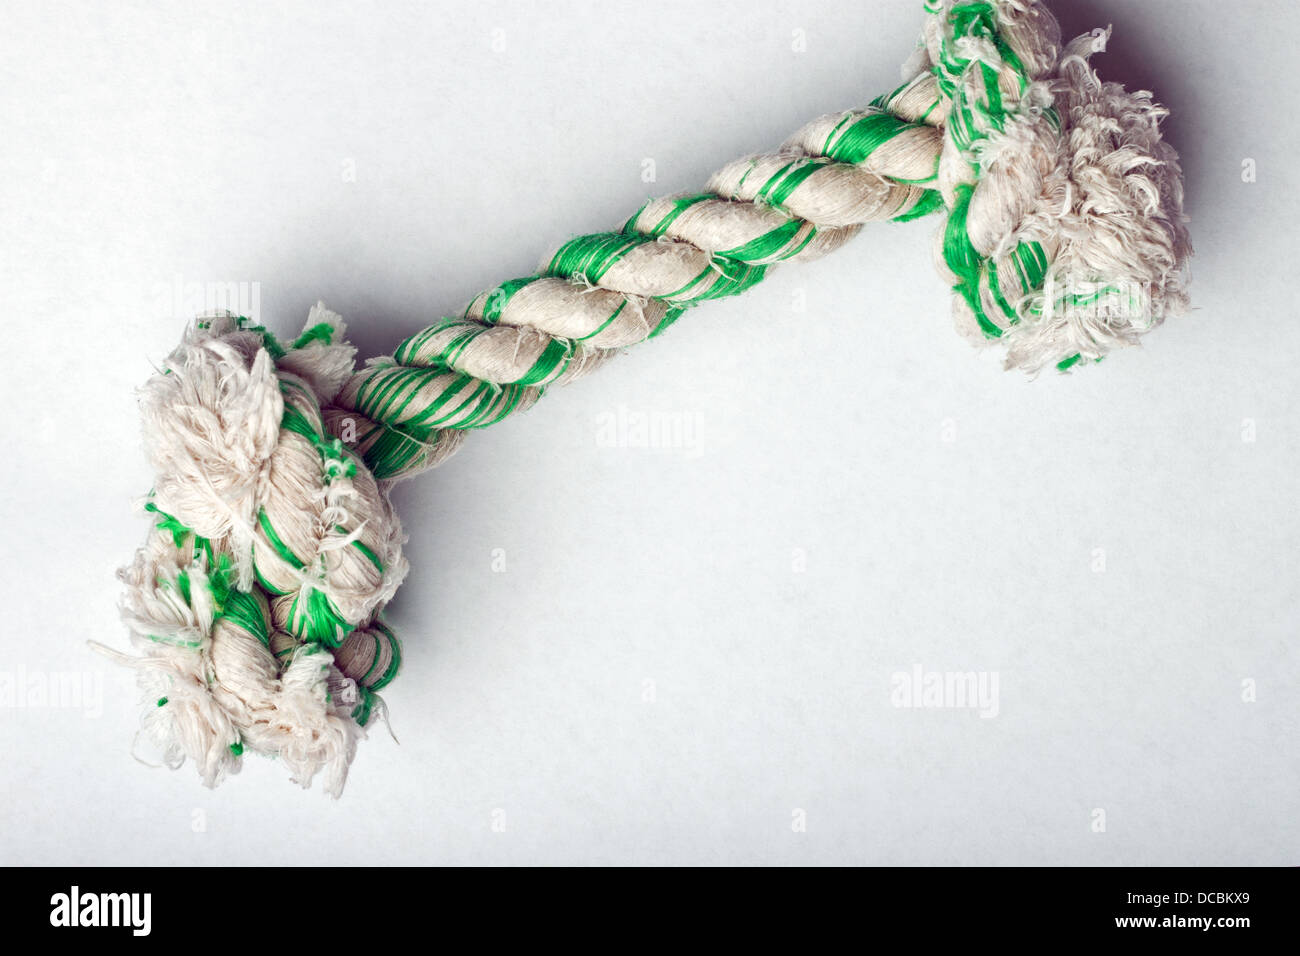 Knotted rope dog toy on white surface Stock Photo